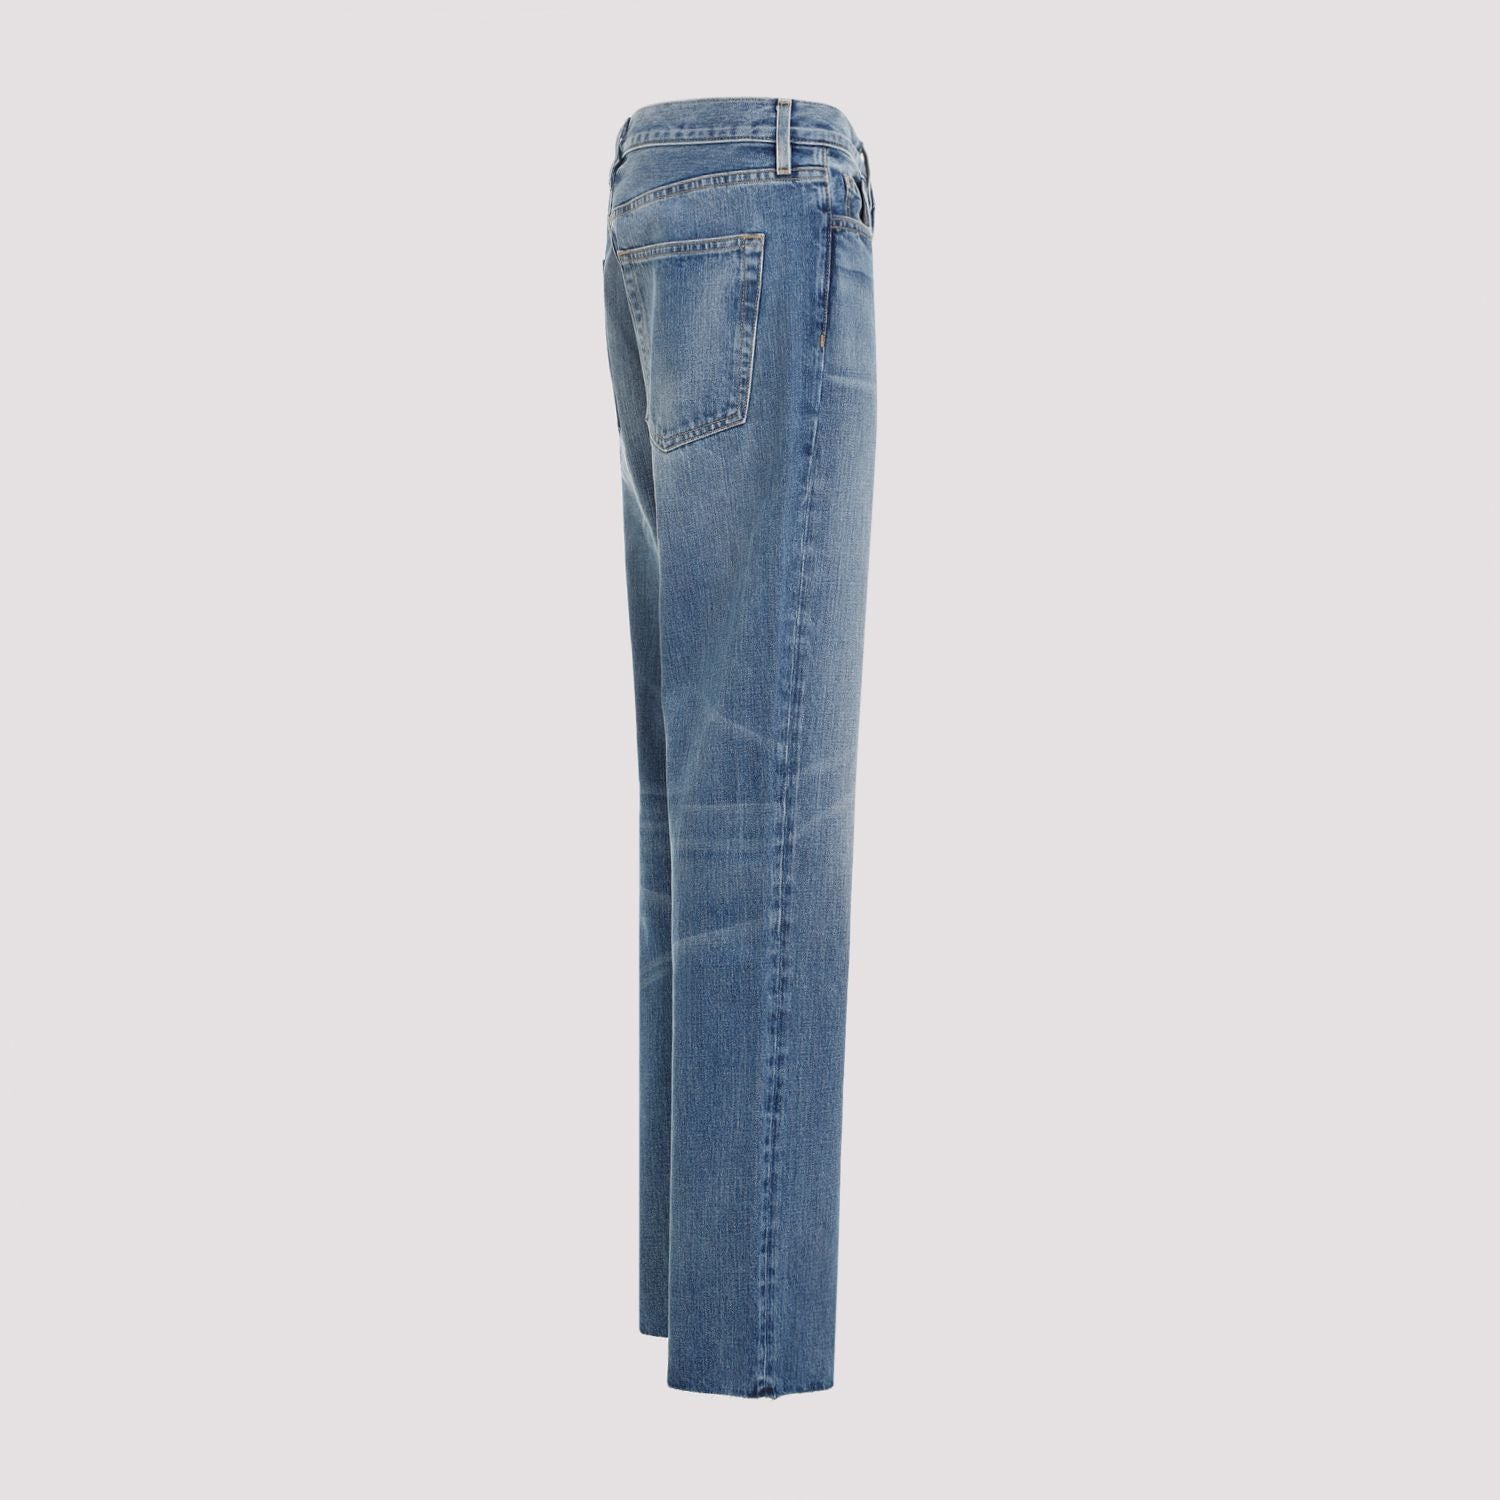 Shop Fear Of God Blue Denim Jeans For Men From The Ss24 Collection